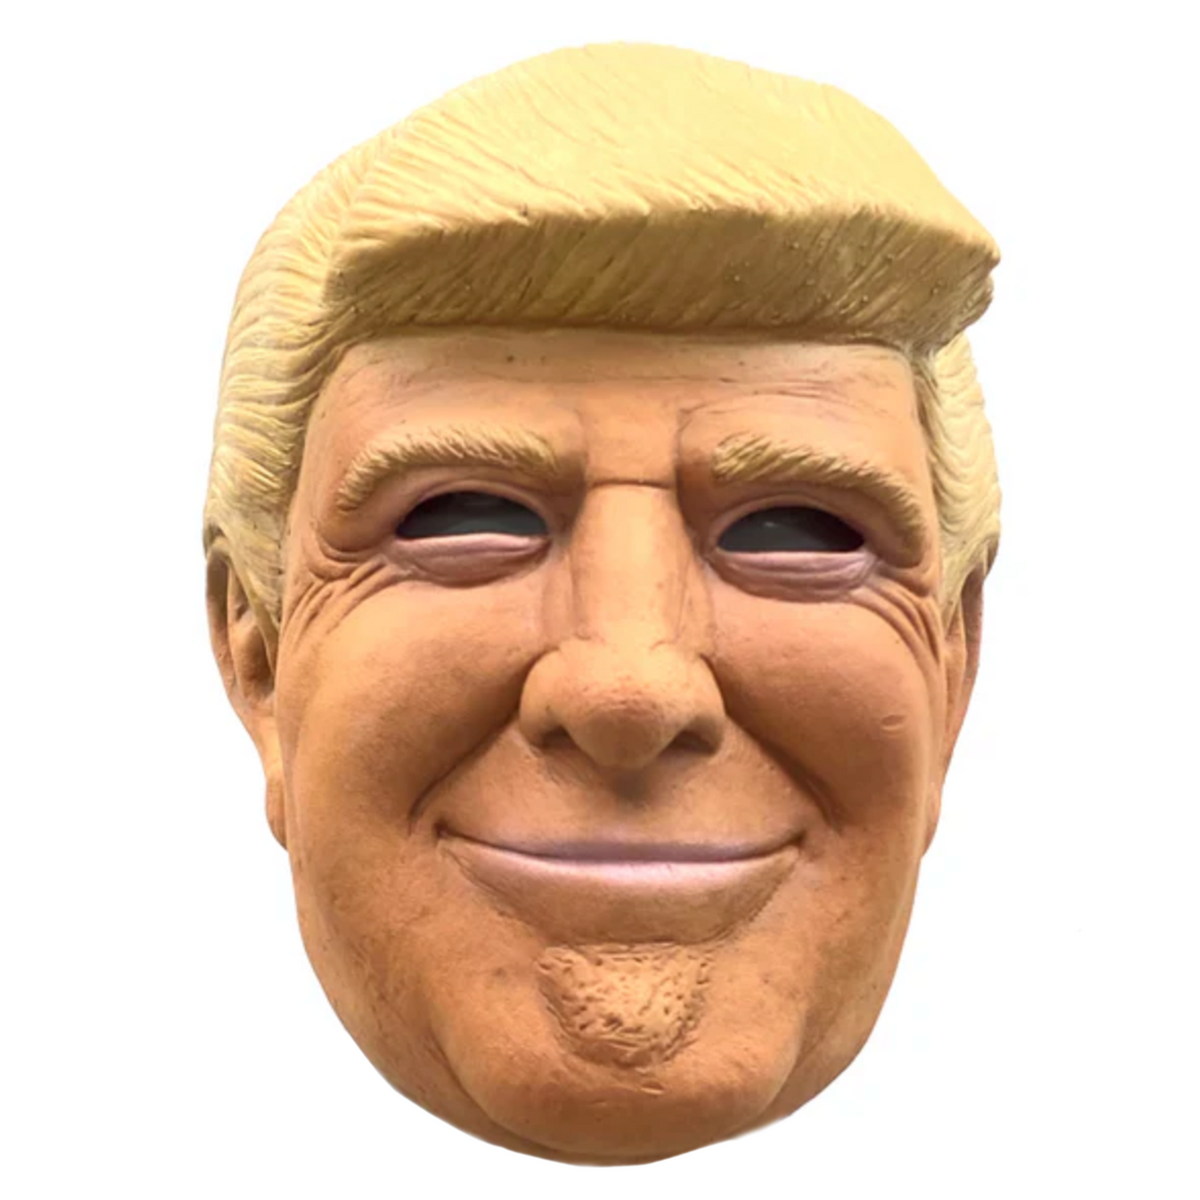 The Donald Latex Mask